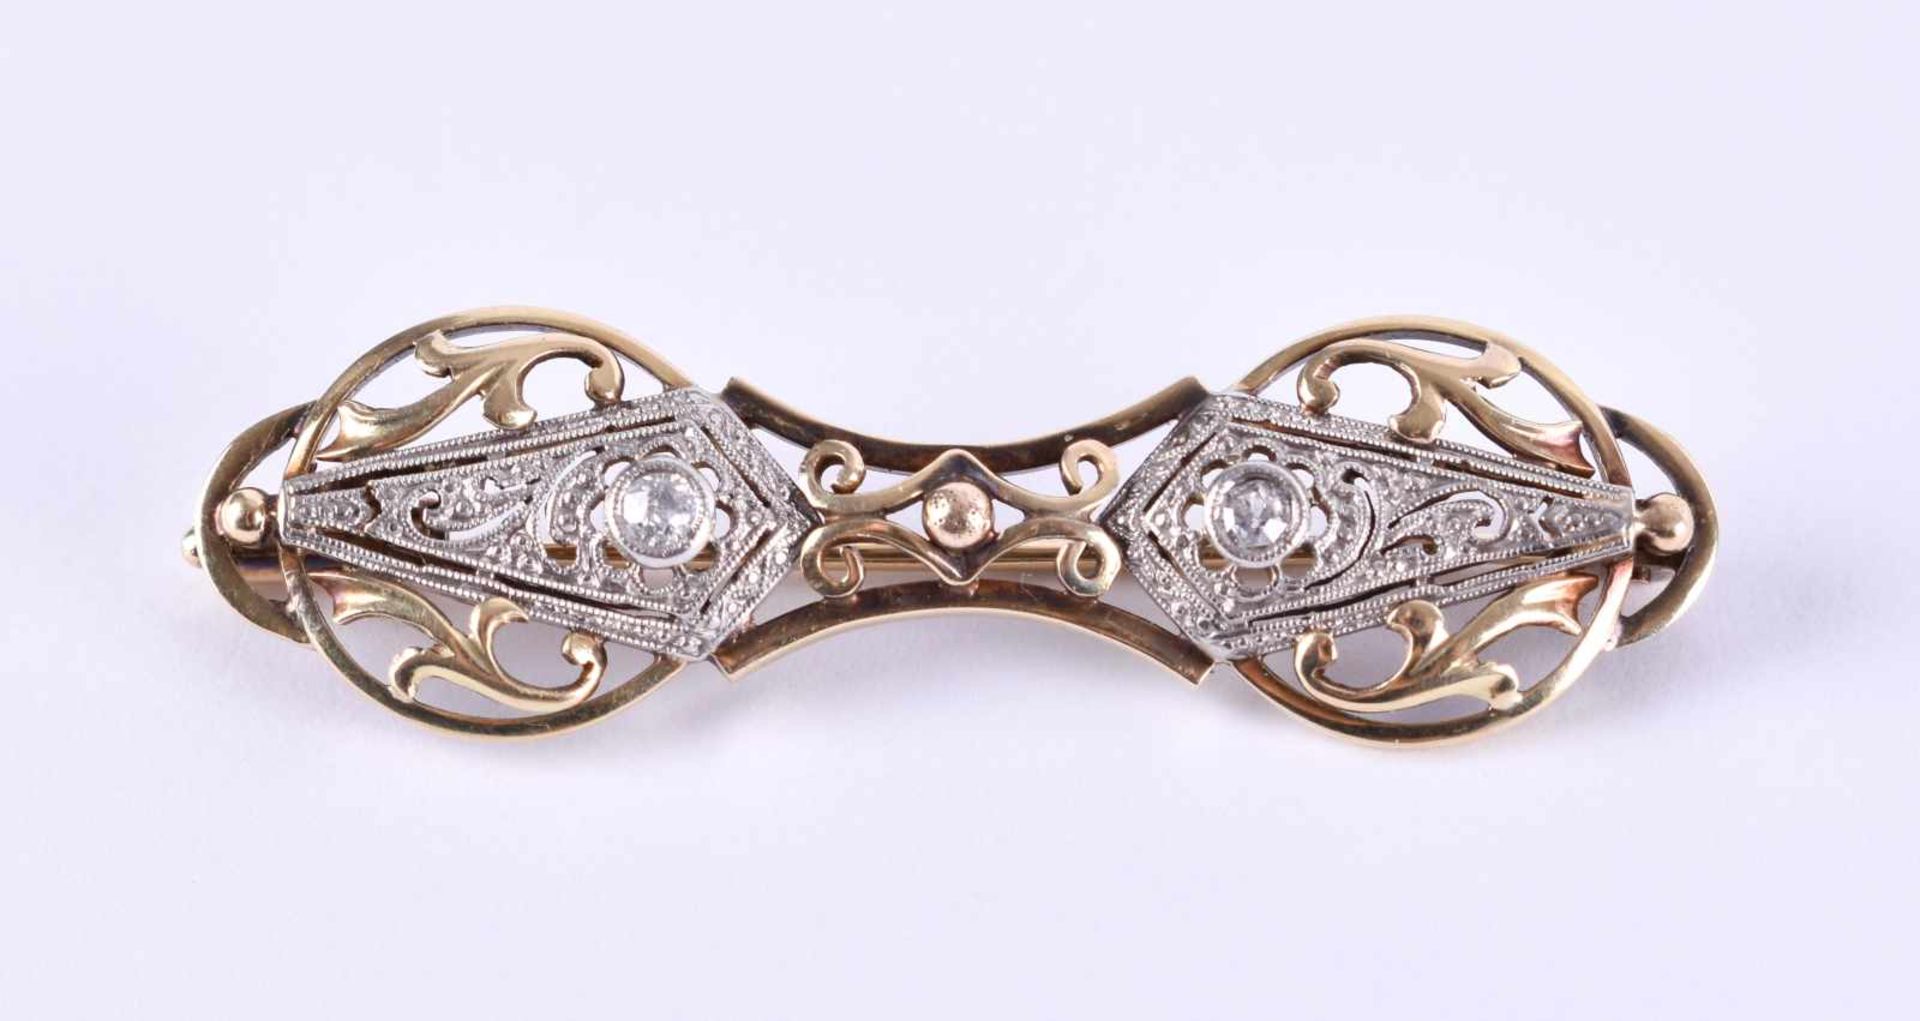 Art Deco brilliant broochyellow gold / white gold 585/000, 45 mm x 10 mm, set with 2 small diamonds,